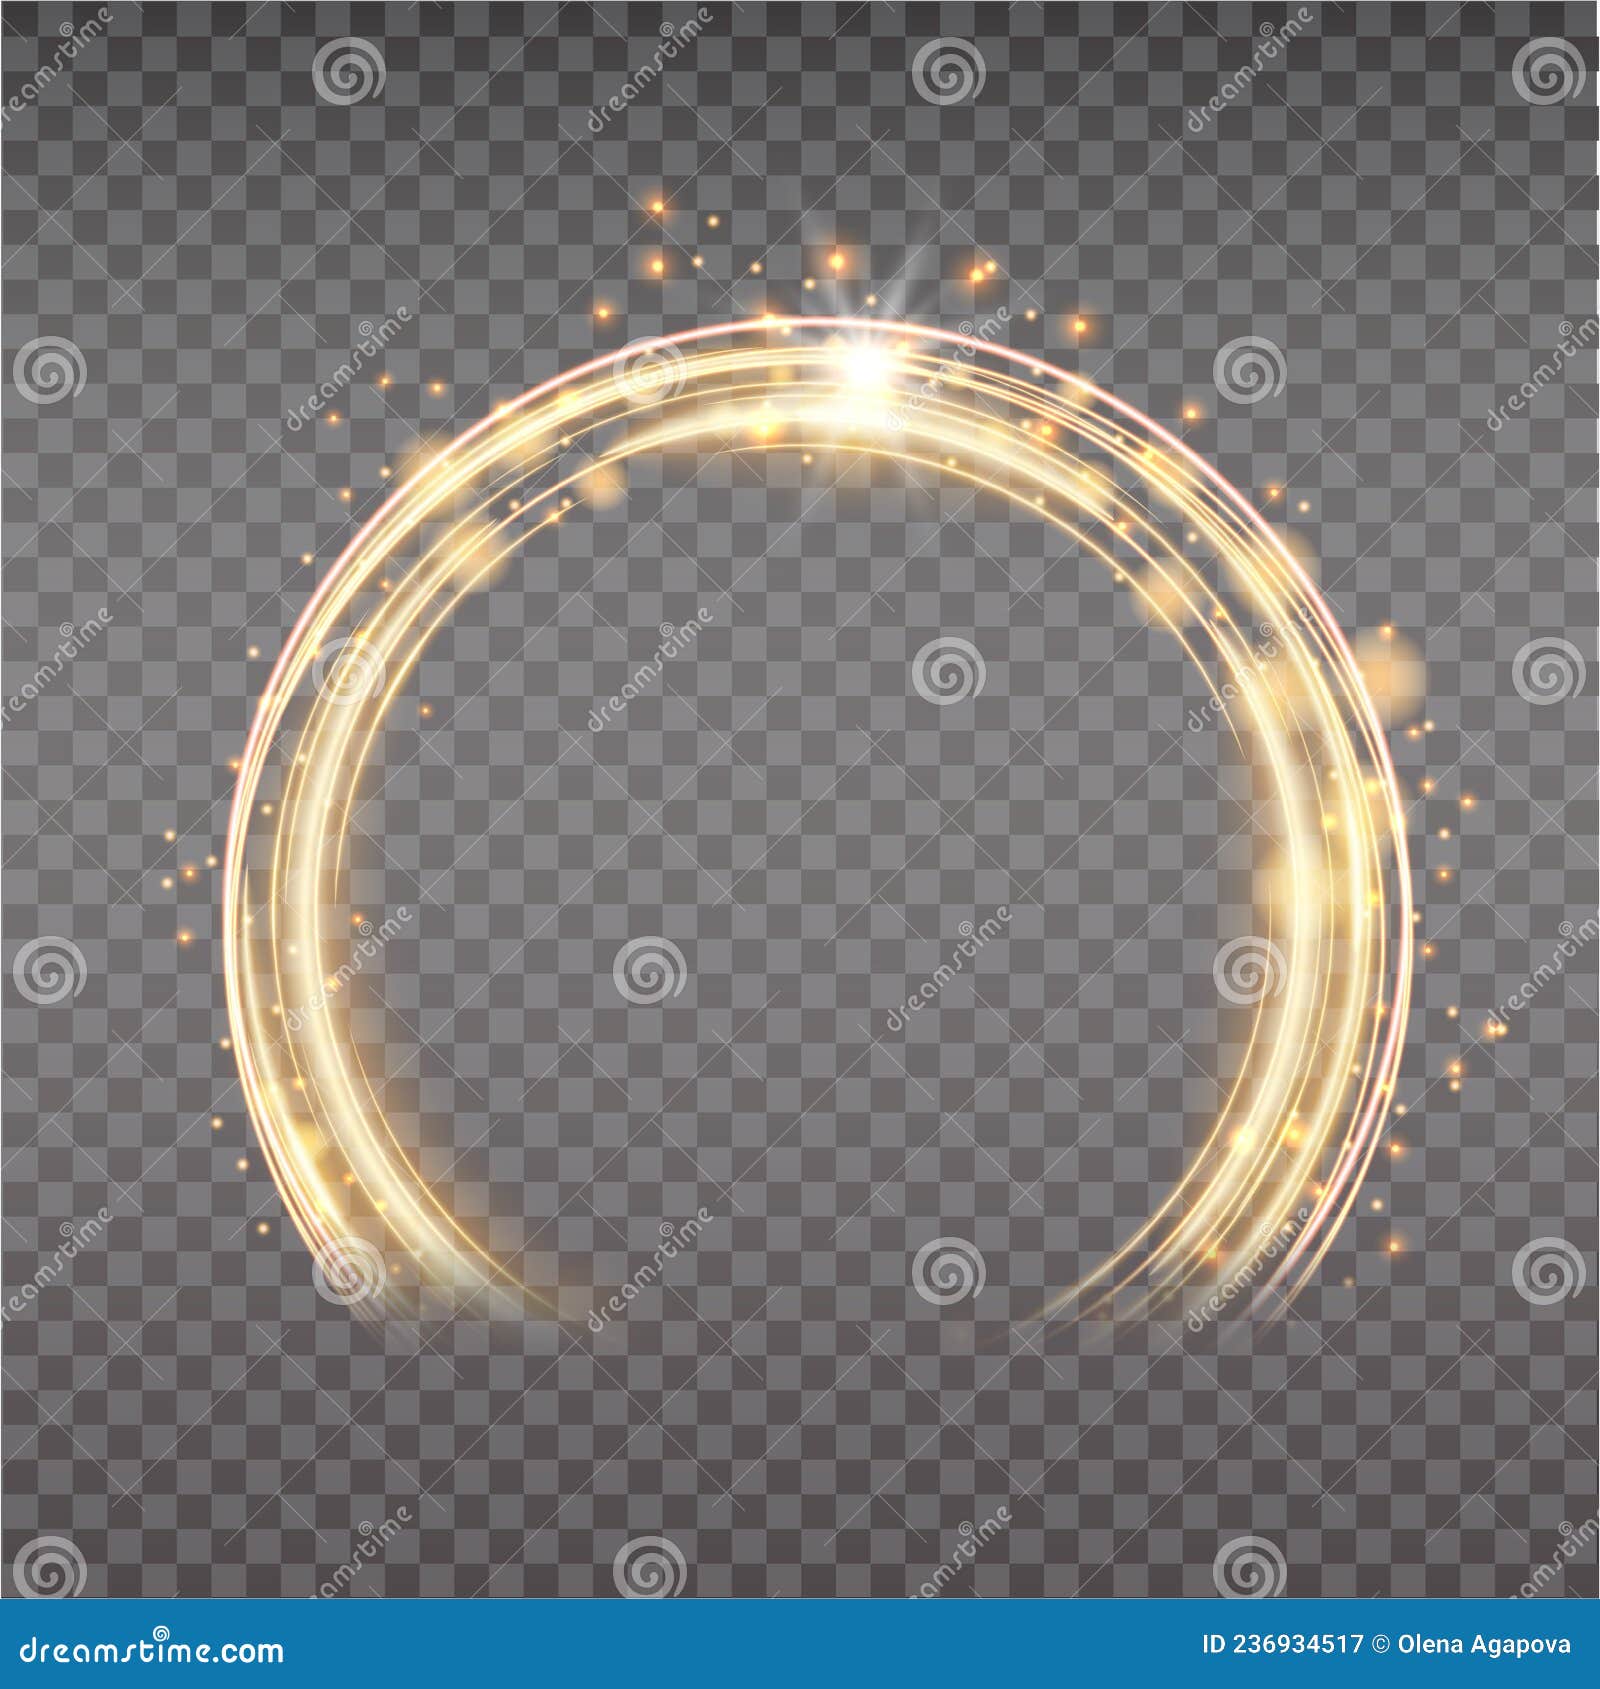 gold magic arc. abstract magic light effect. luminous neon lines with flying lights.